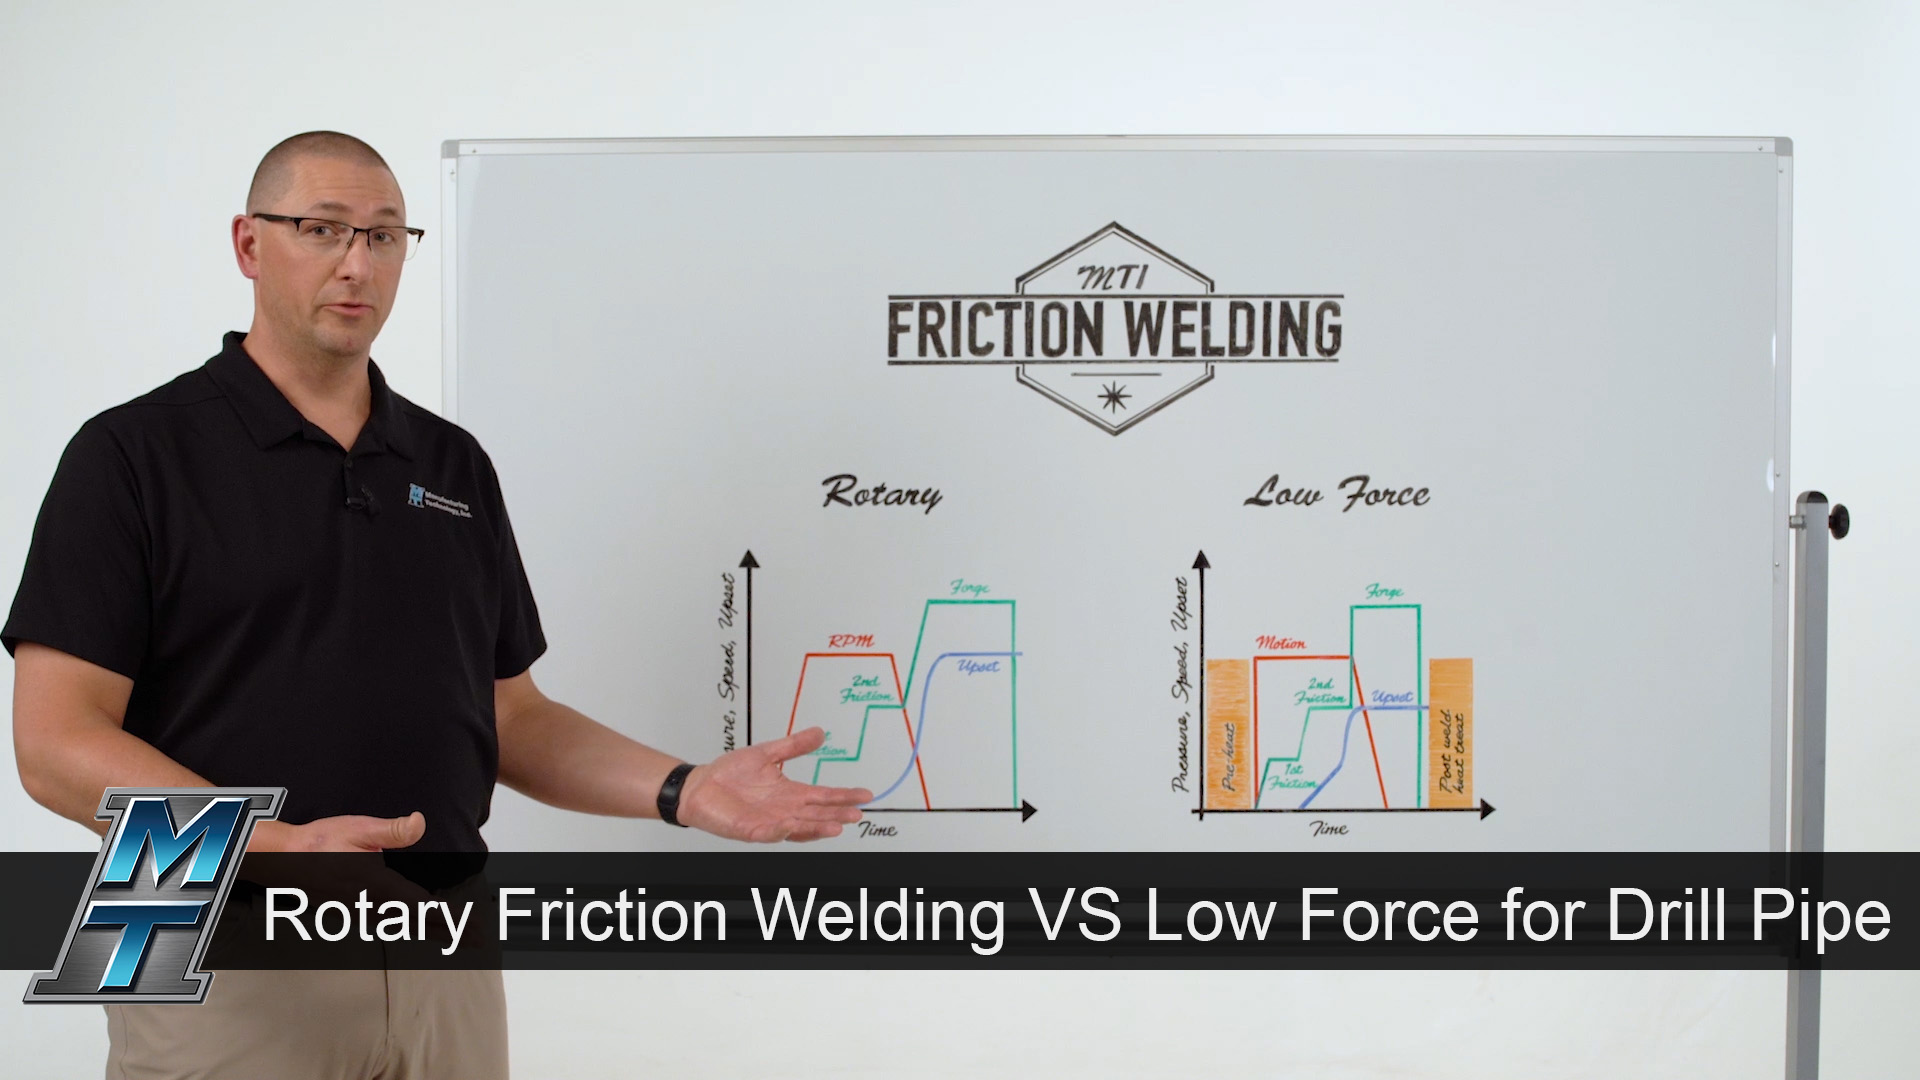 Whiteboard Wednesday: Rotary VS Low Force Friction Welding for Drill Pipe